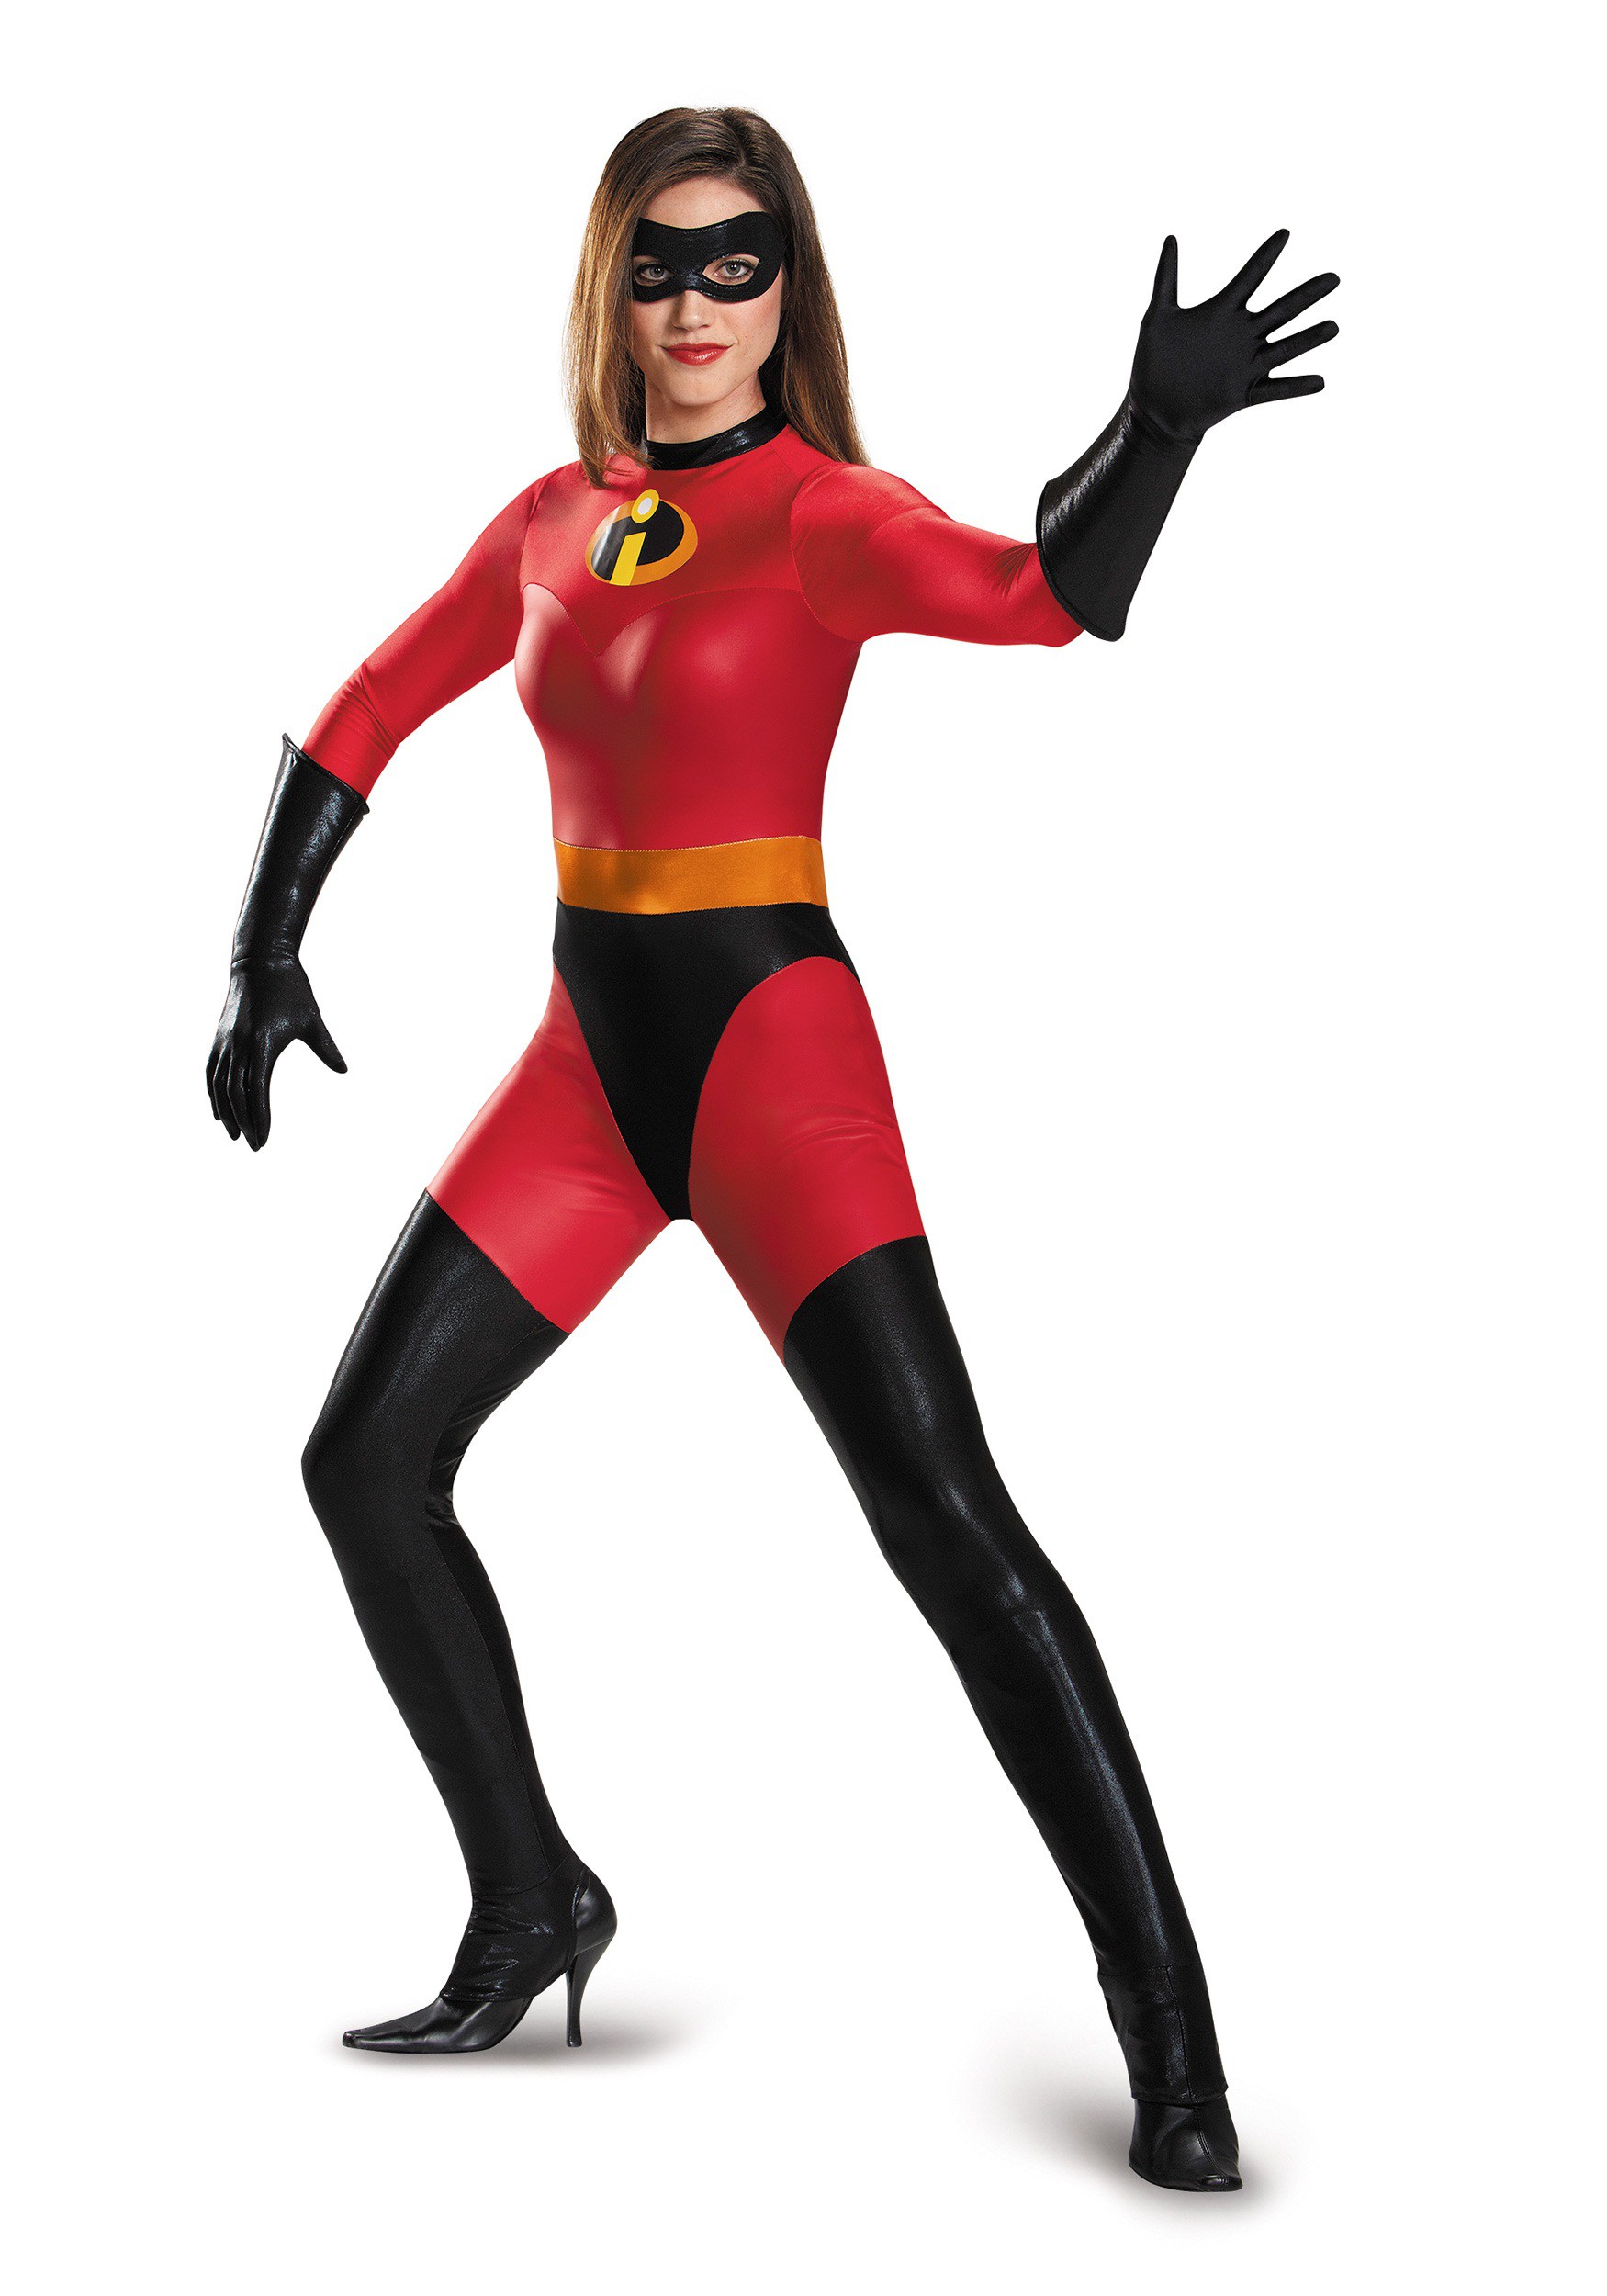 https://images.halloweencostumes.ca/products/30642/1-1/mrs-incredible-bodysuit-costume.jpg